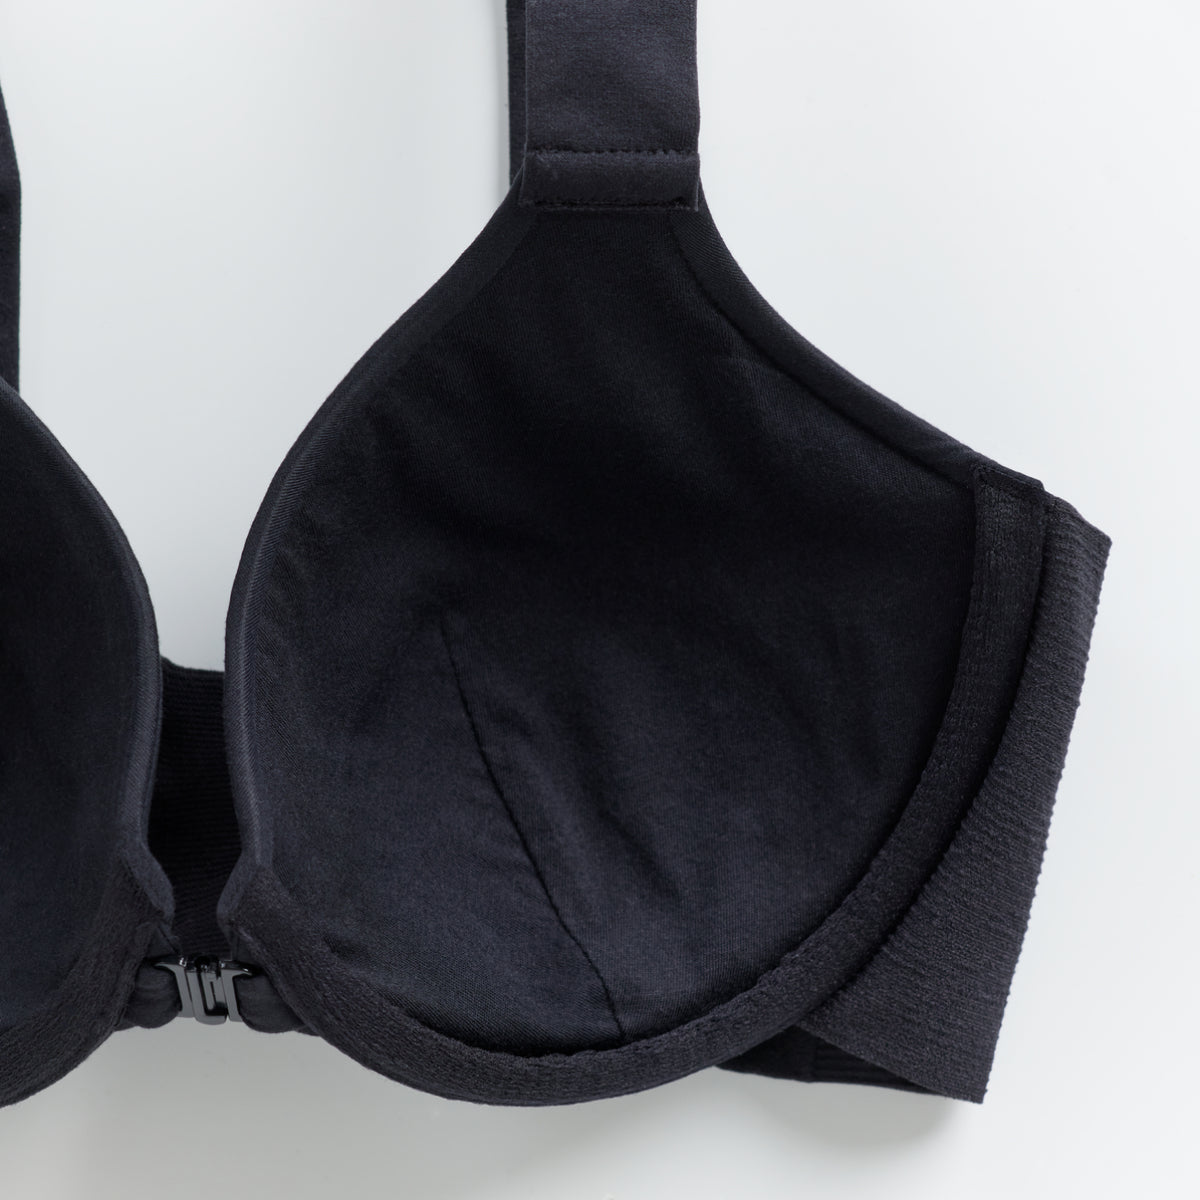 Lily Of France Lightly Lined Convertible Strap Bra 2-pack 2179760 in Black